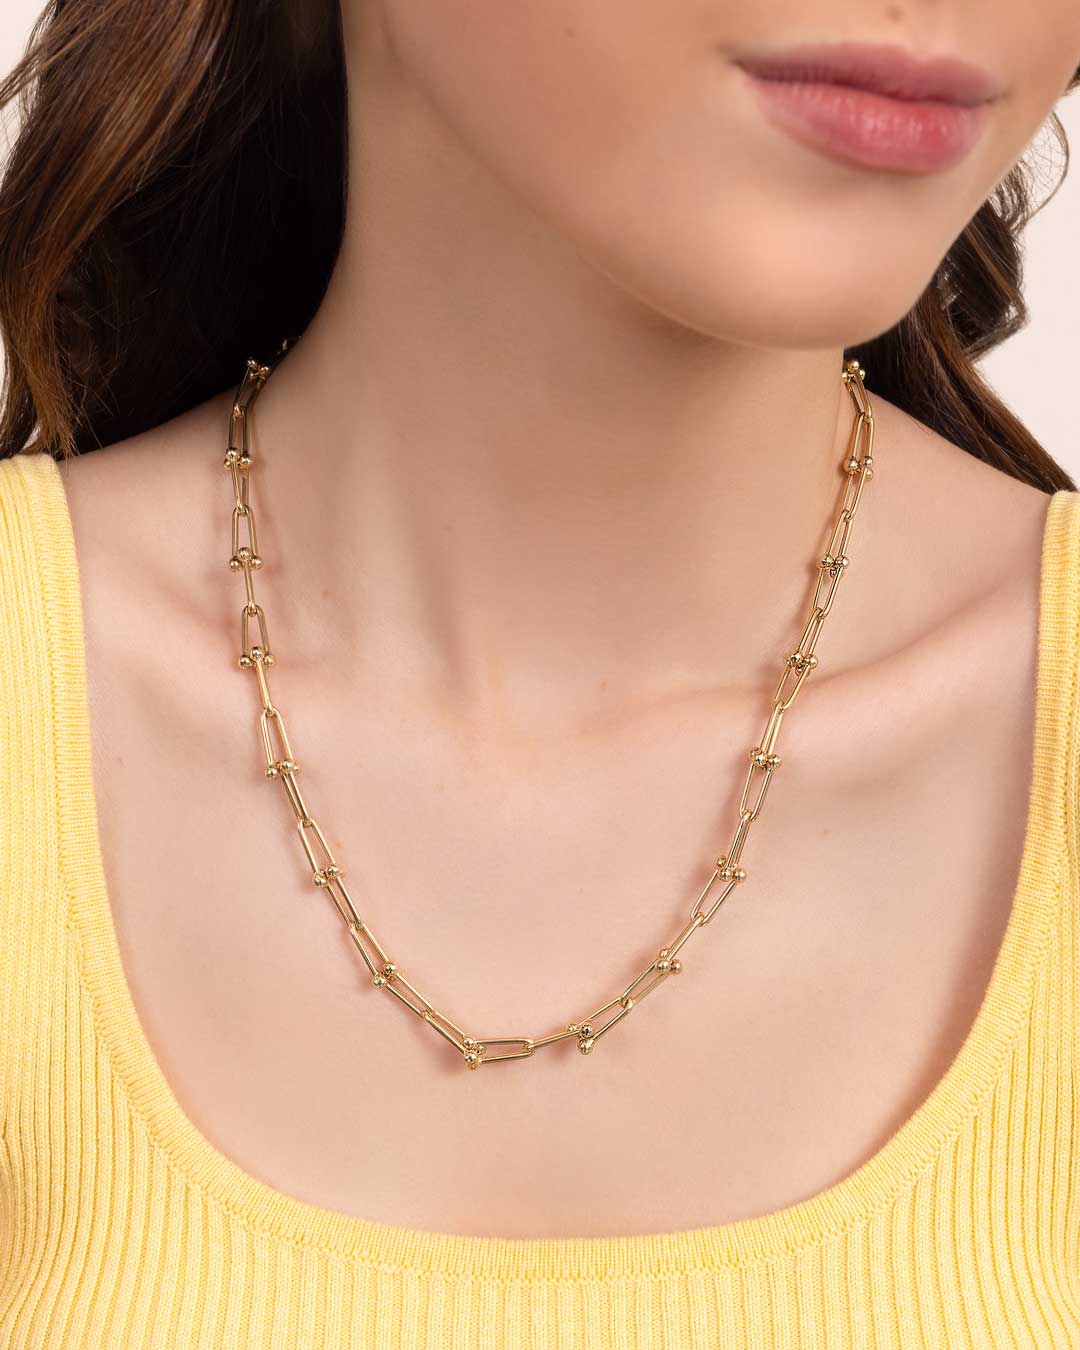 14K GOLD DOT LINK CHAIN NECKLACE